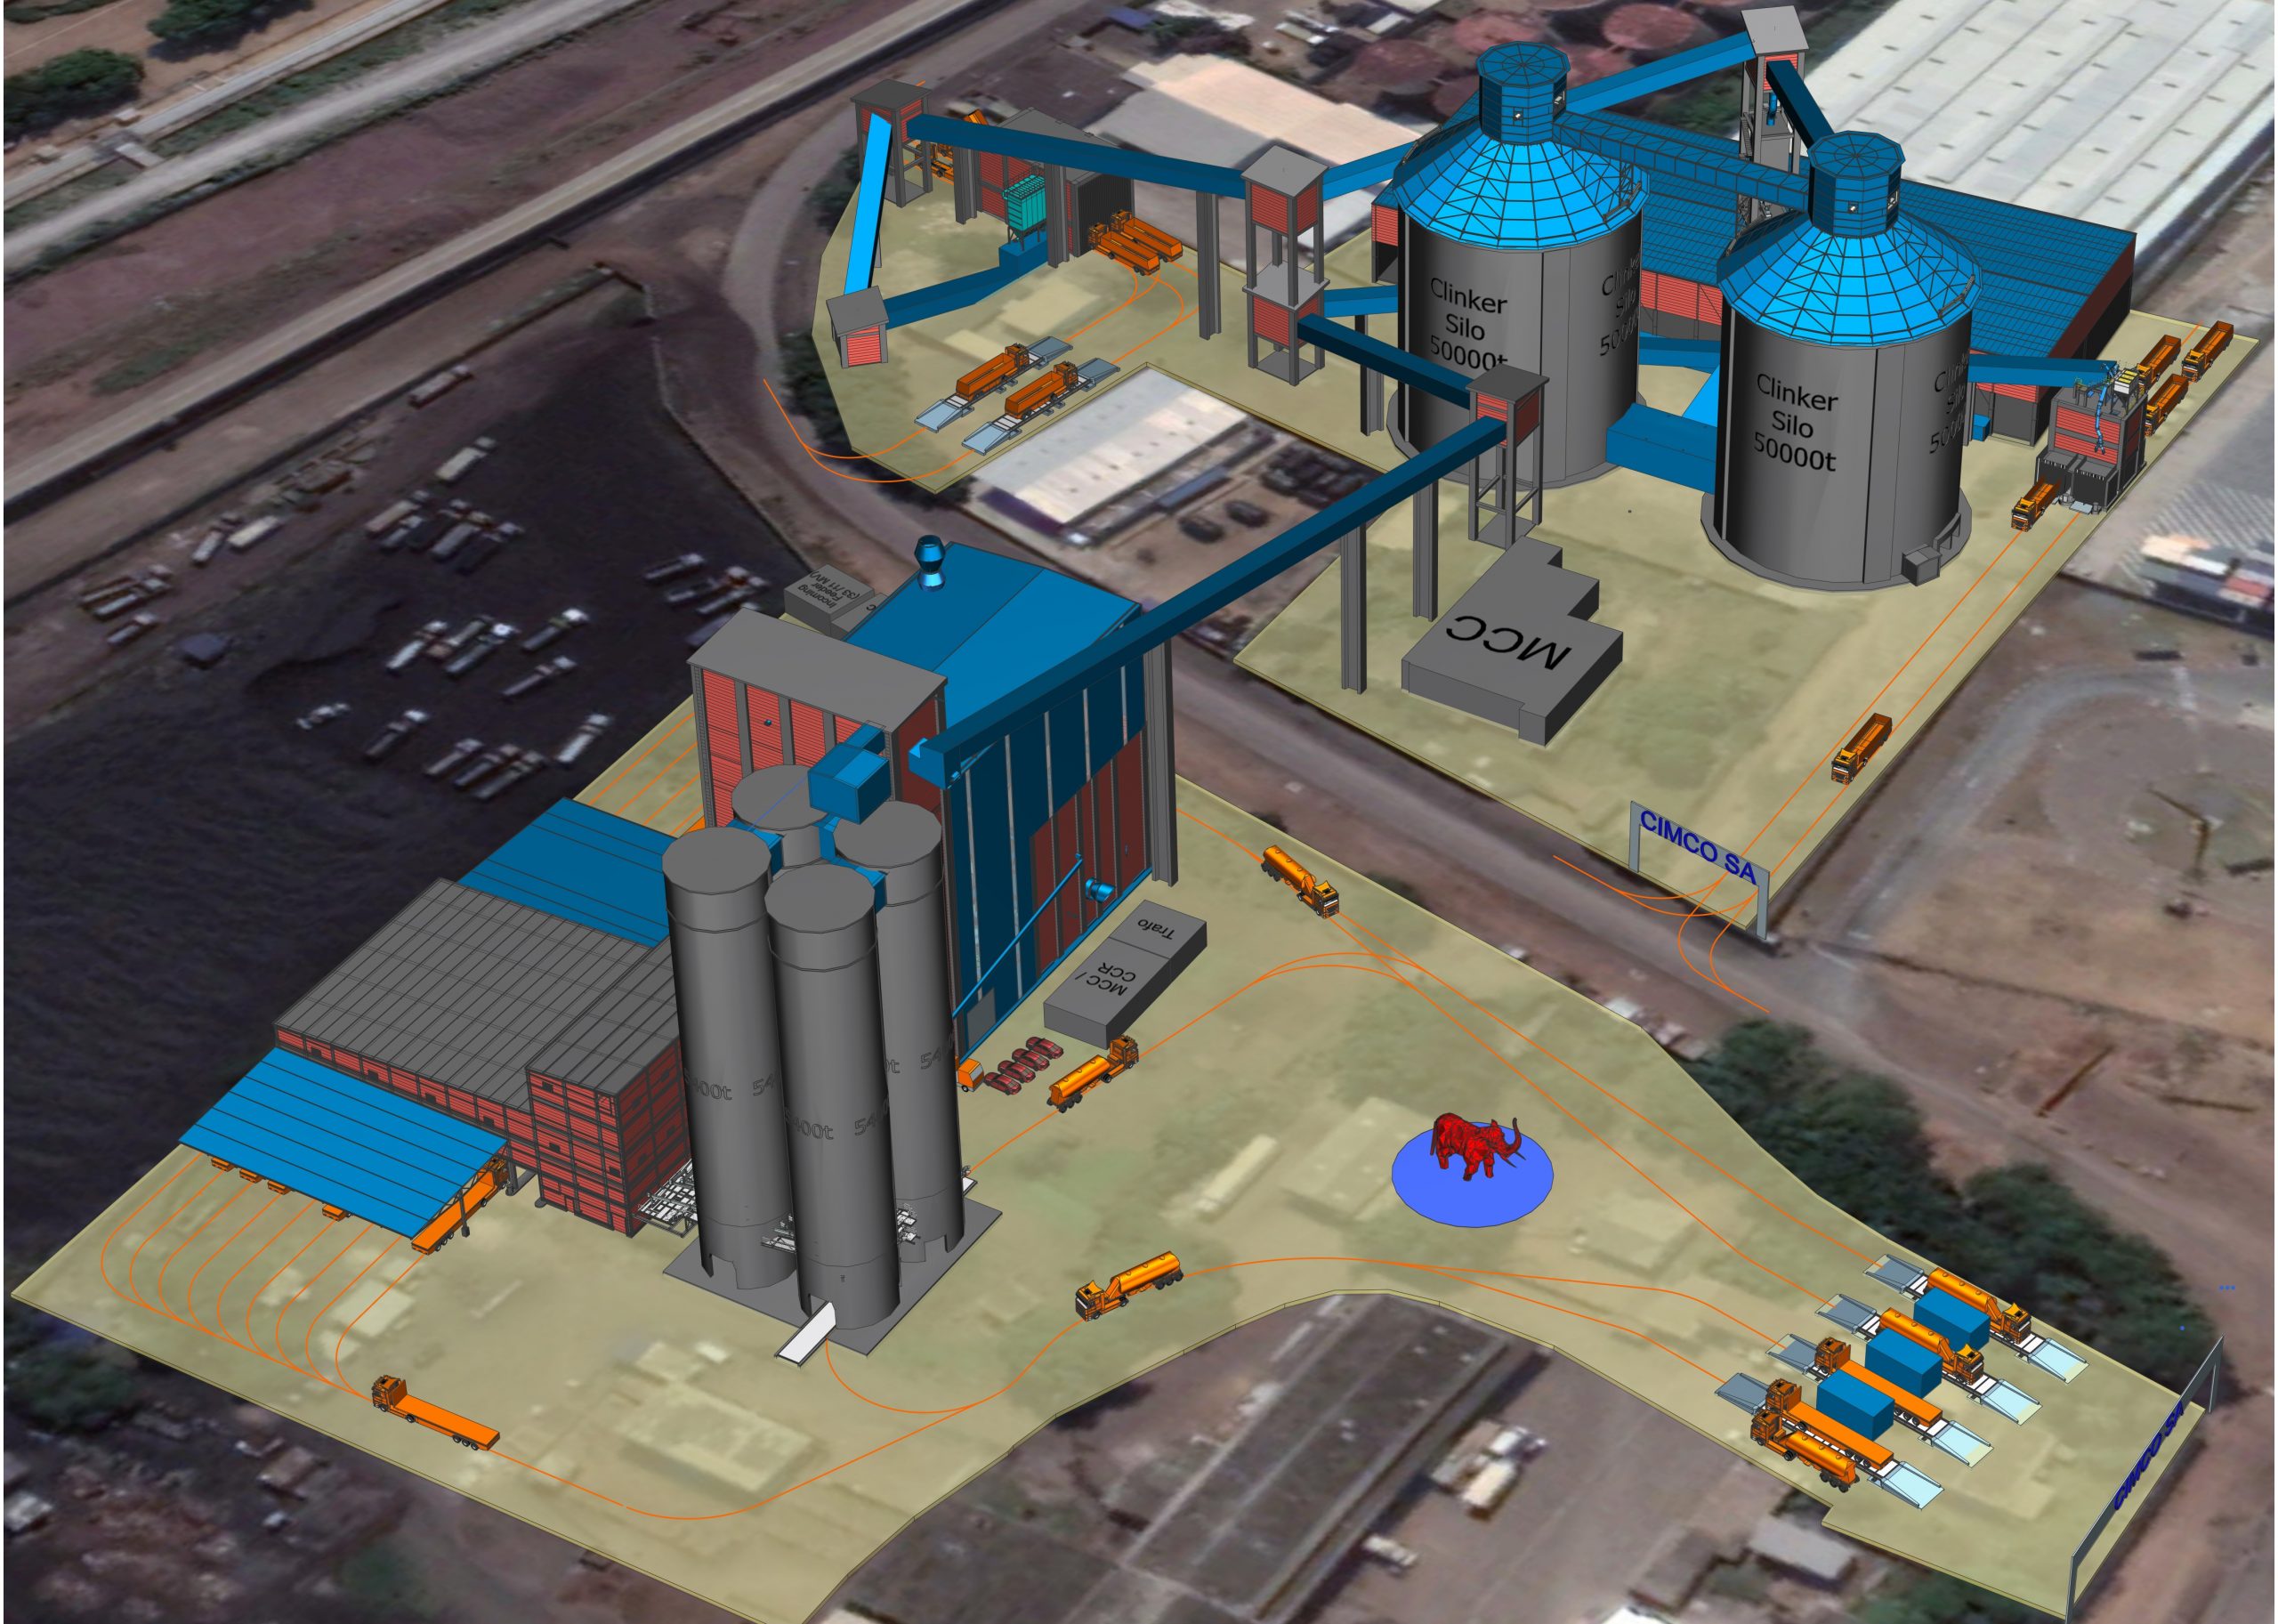 Contract award of a 2.5 million tpa cement grinding plant with VRM from CIMCO / Togo